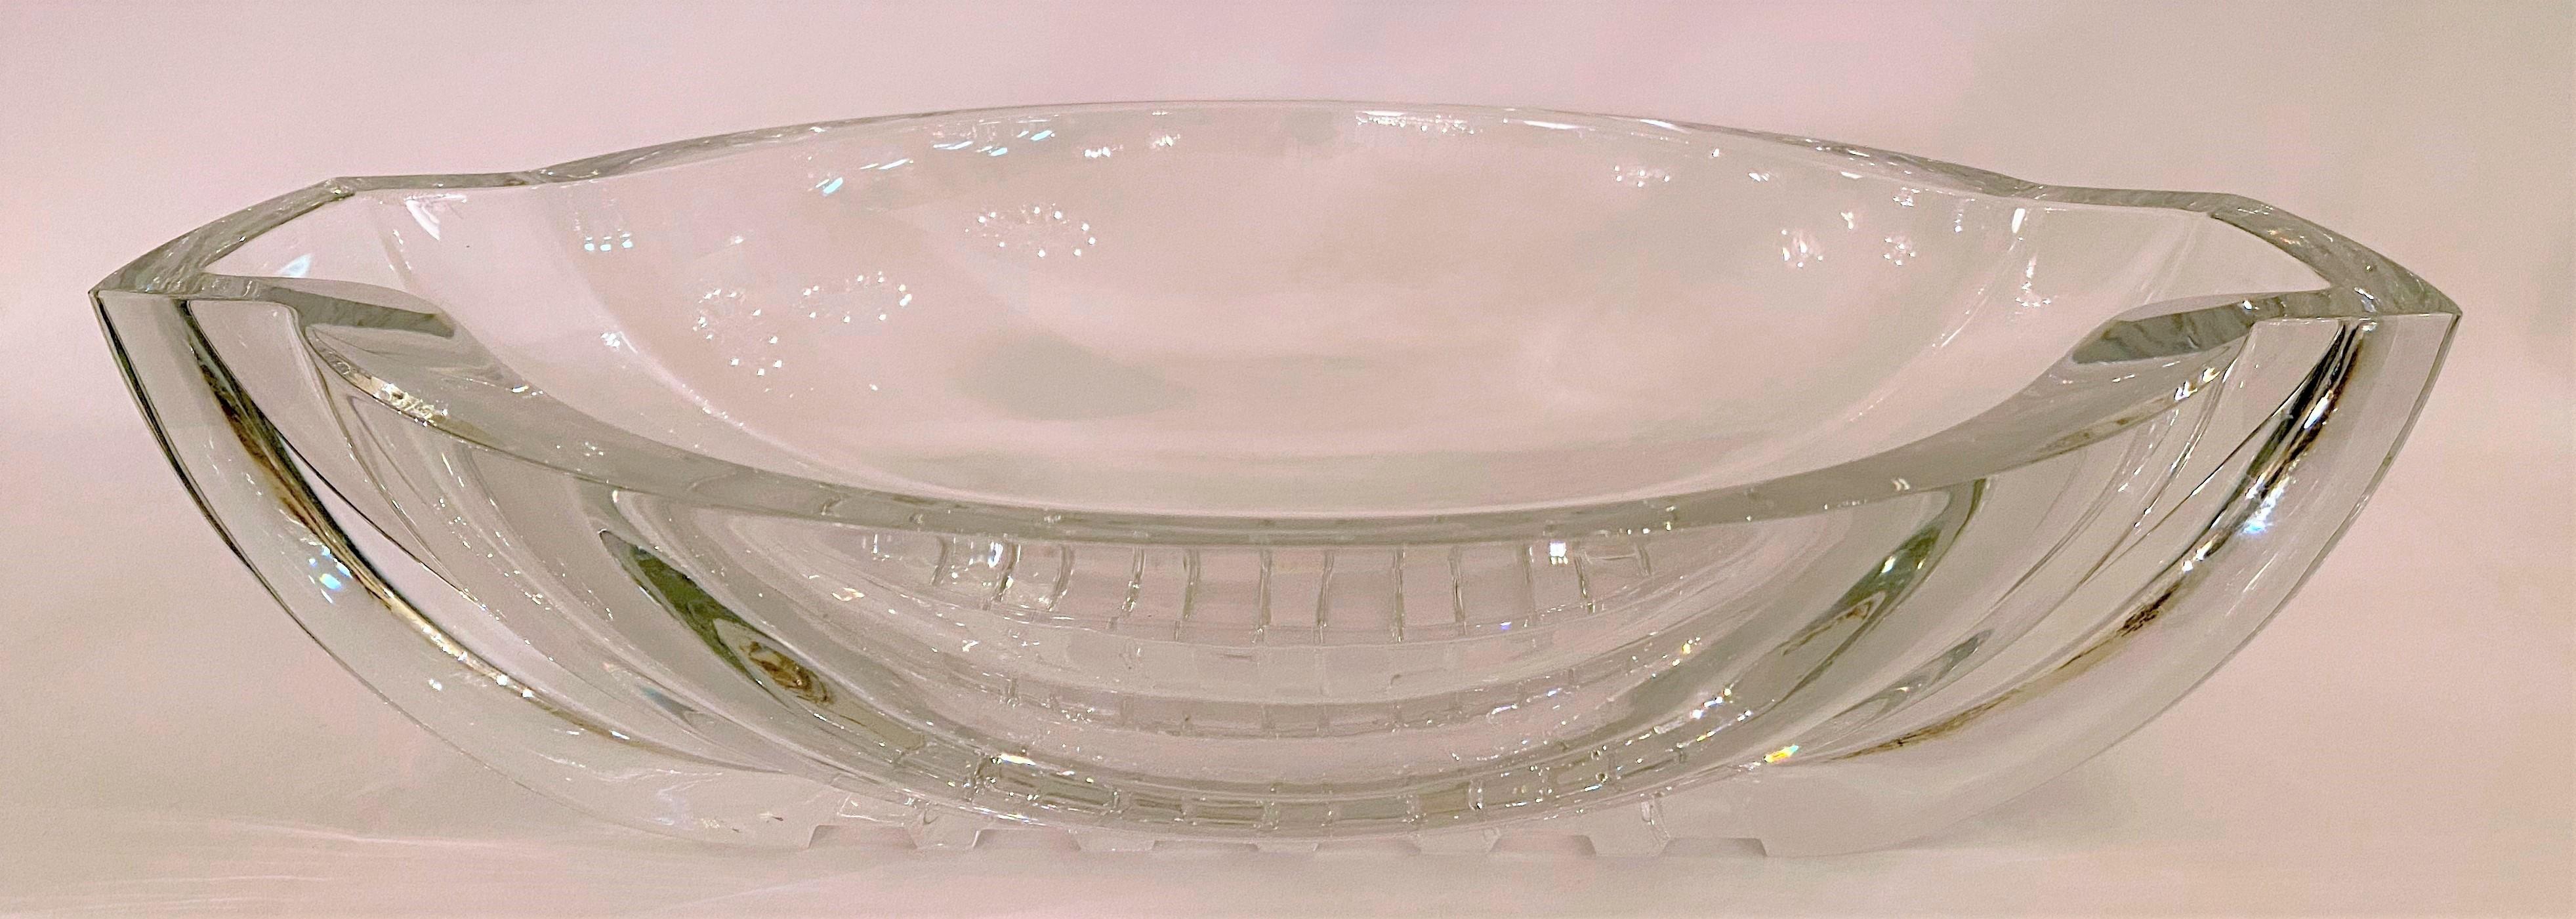 A nicely rendered crystal centerpiece bowl that would marry well with a variety of styles.